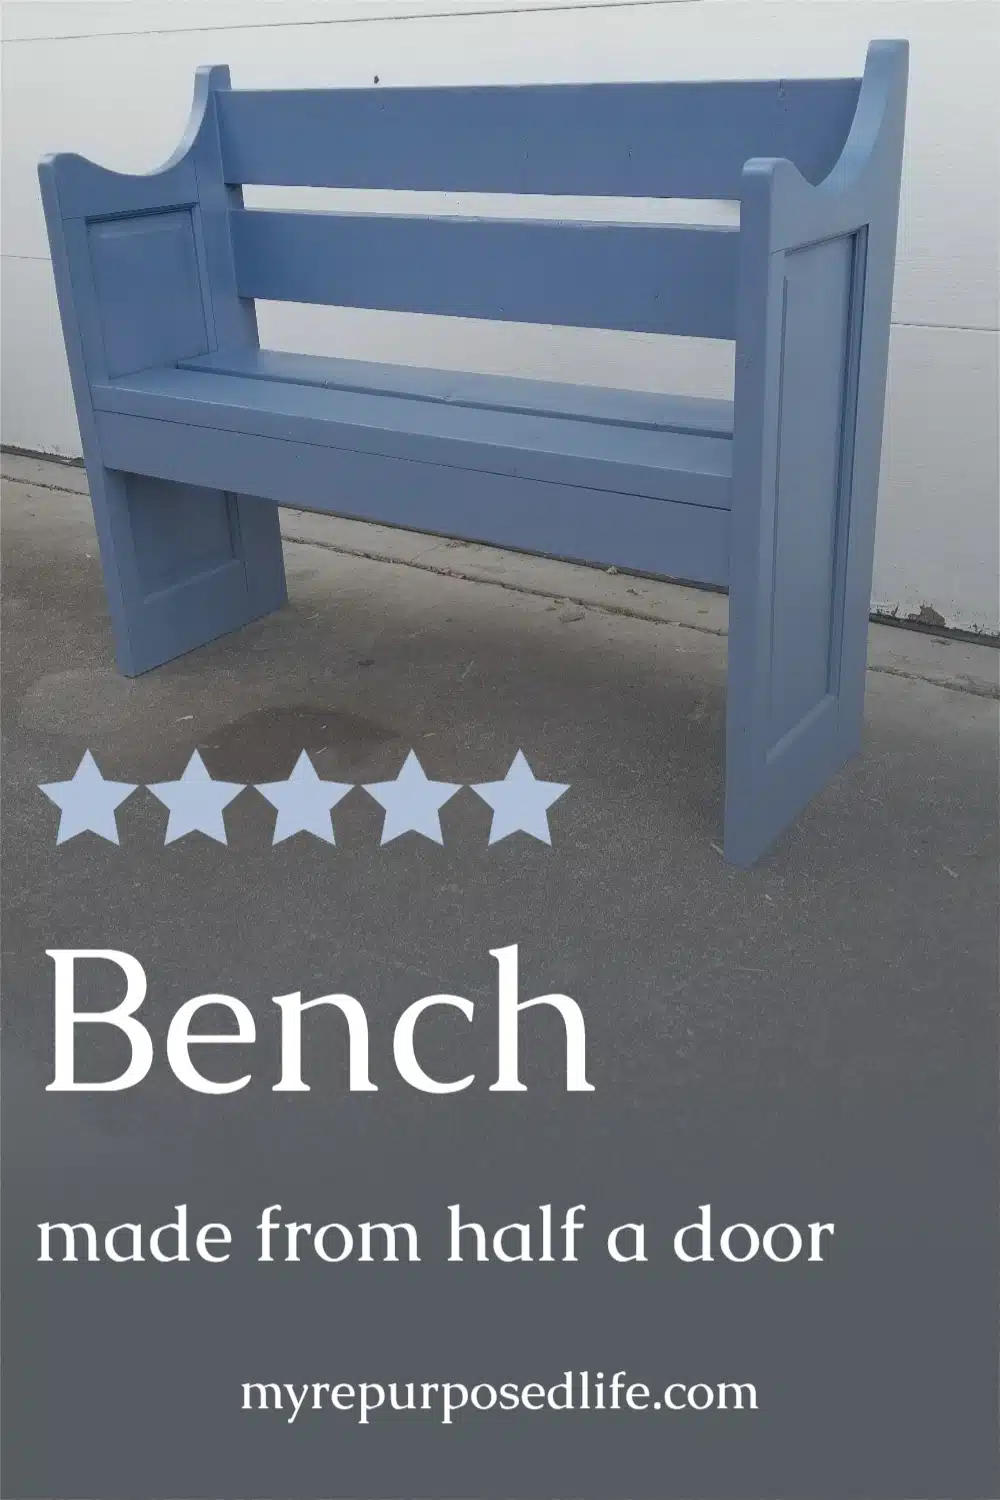 Making a small bench out of a reclaimed door it a fairly easy weekend project if you follow along with this tutorial. There are a couple of variations, you can be the judge of which you prefer. #MyRepurposedLife #repurposed #door #bench #weekend #diy #project via @repurposedlife